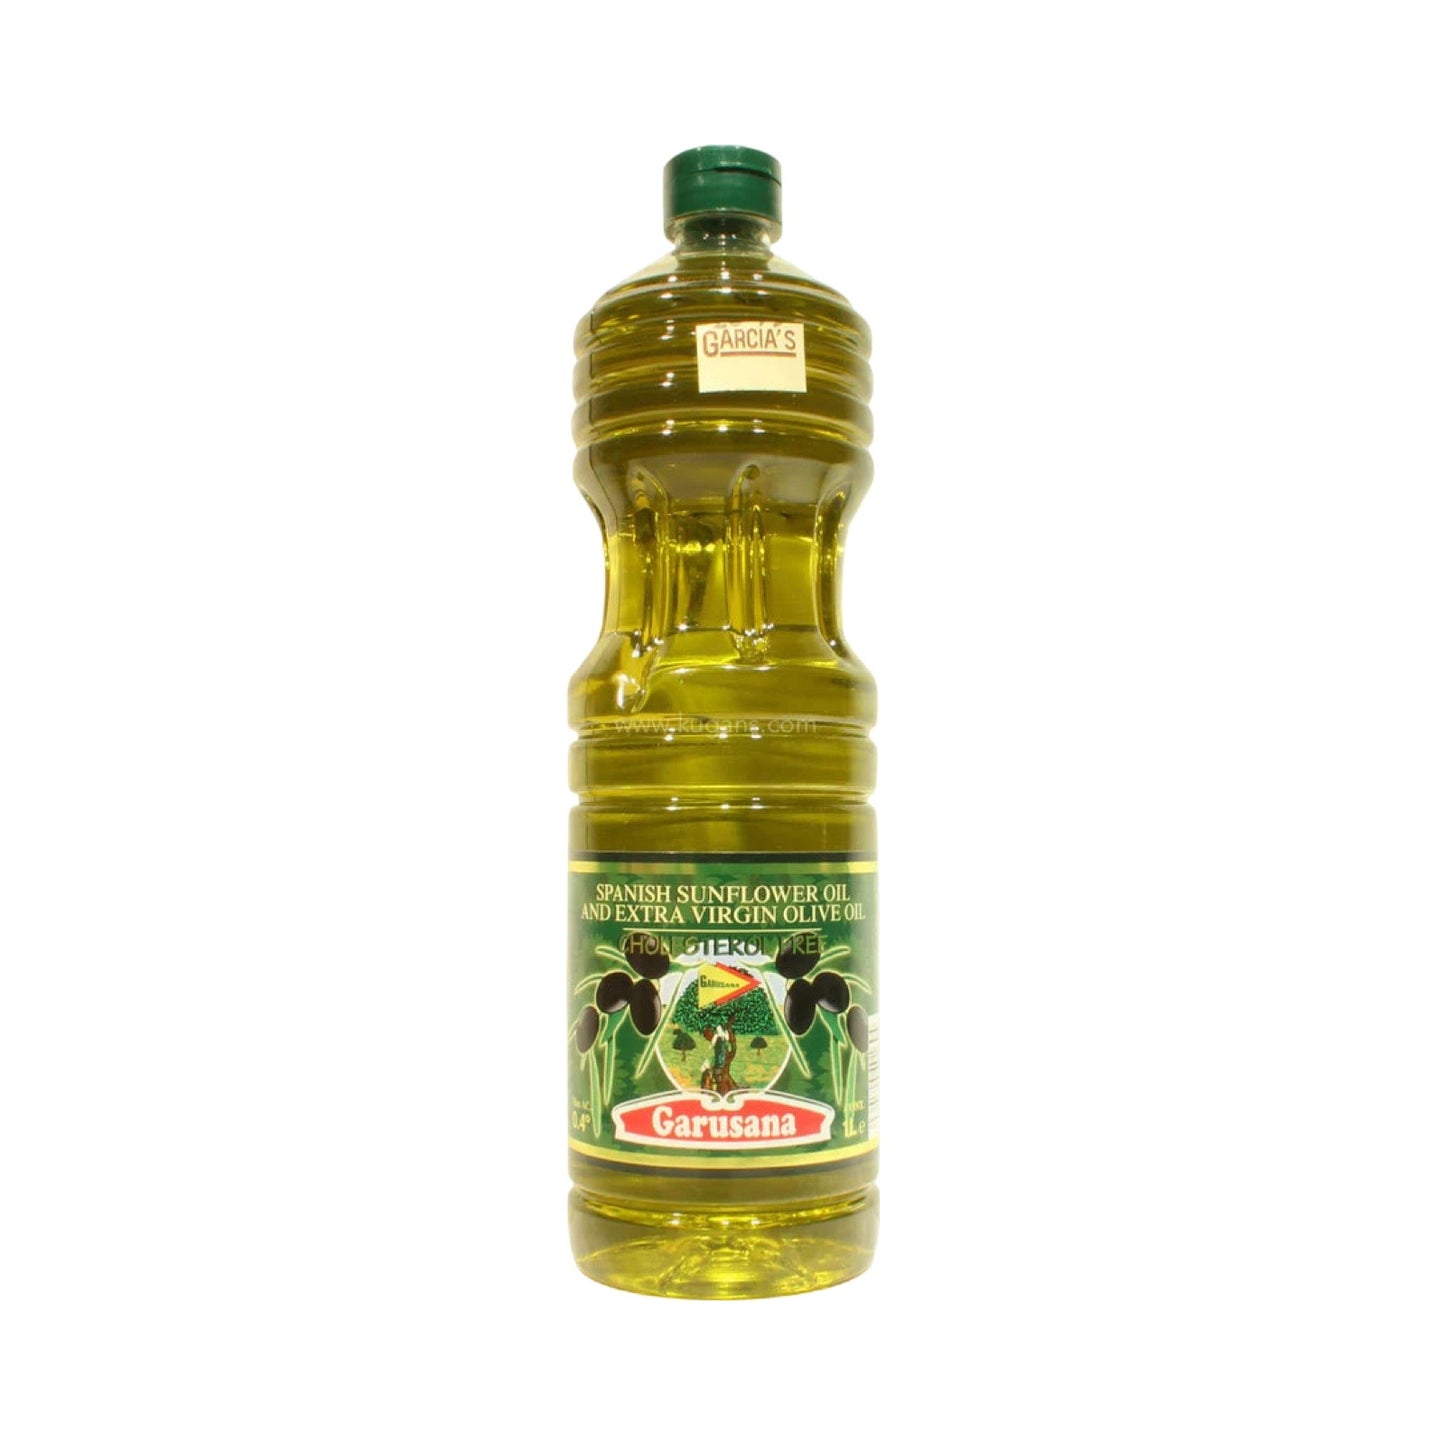 Garusana Sunflower Oil with Extra Virgin Olive Oil 1L